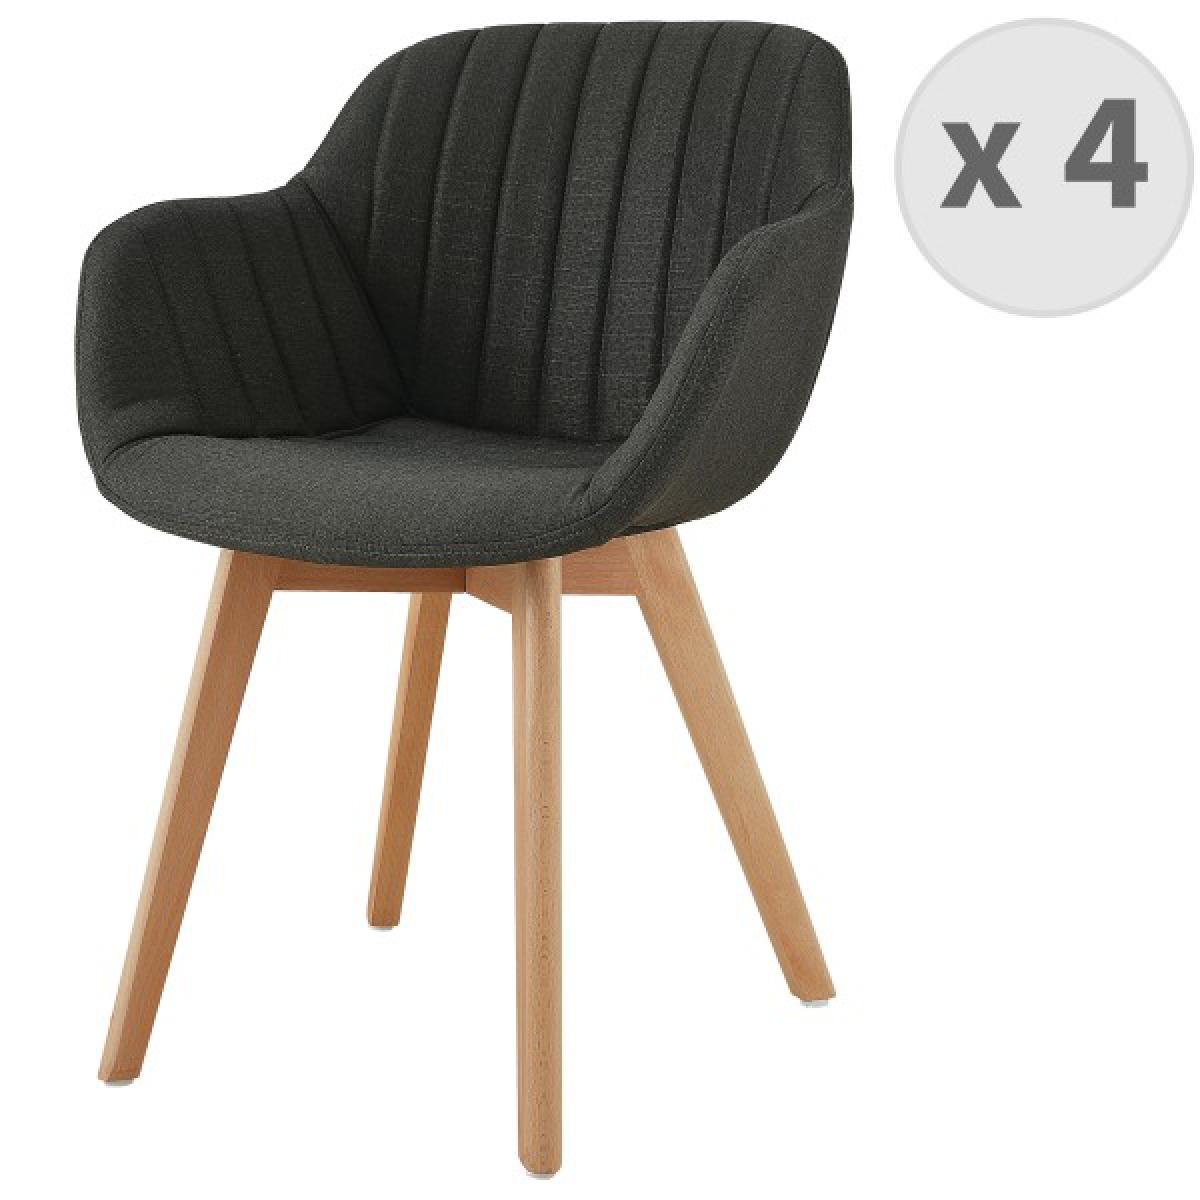 Moloo - STEFFY-Chaises scandinave tissu gris anthracite pied hêtre (x4) - Chaises